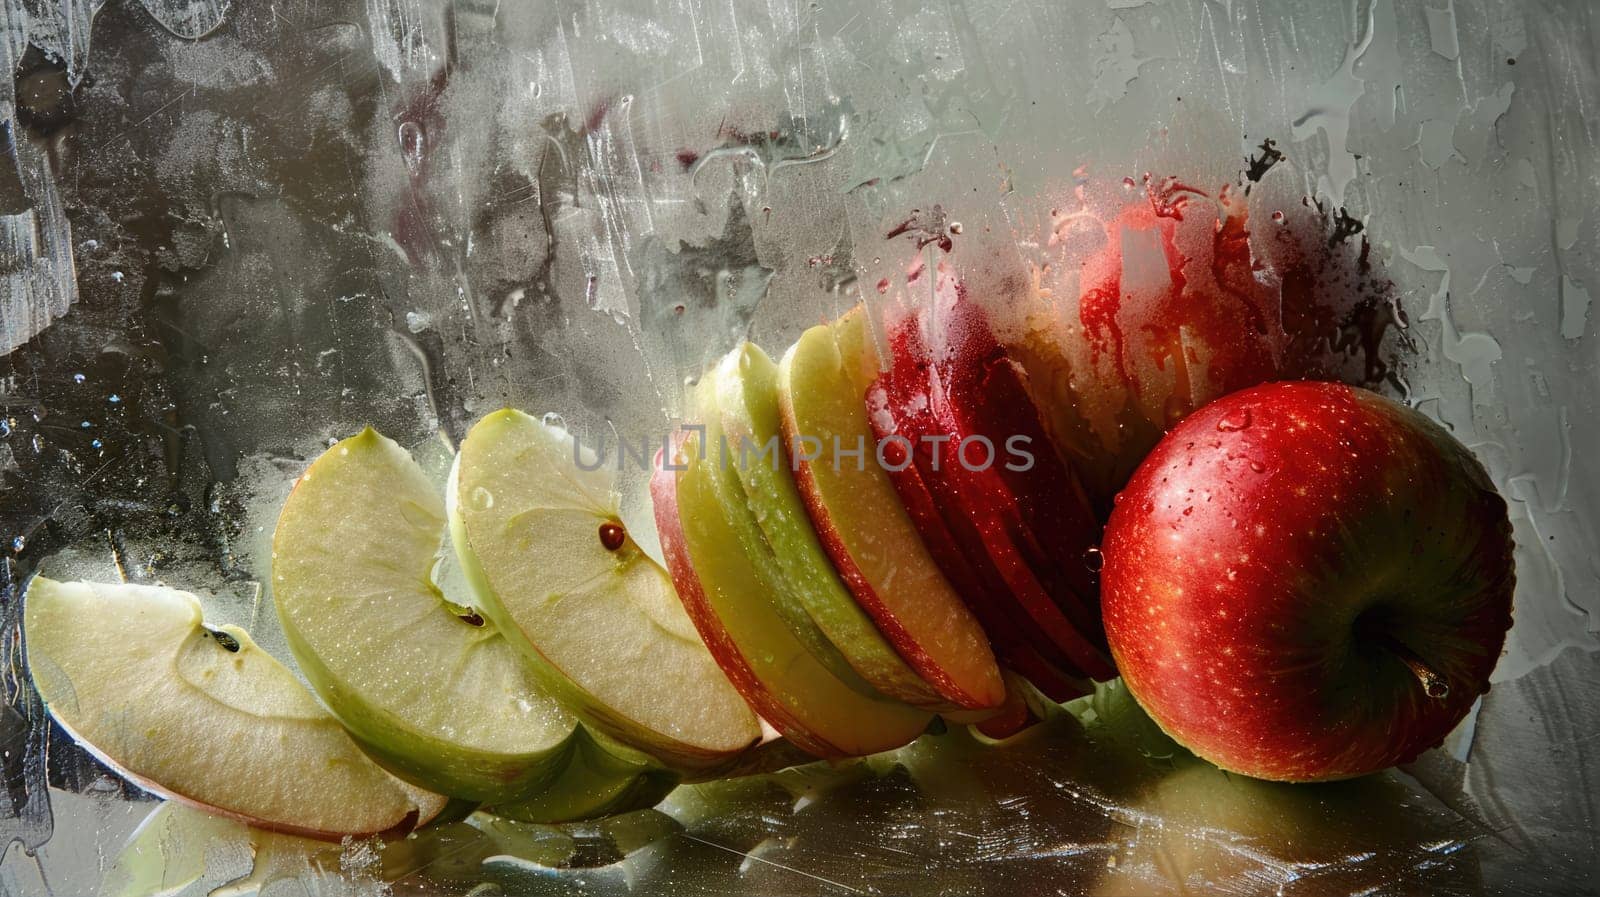 Sliced apple and whole apples on a textured gray background by natali_brill